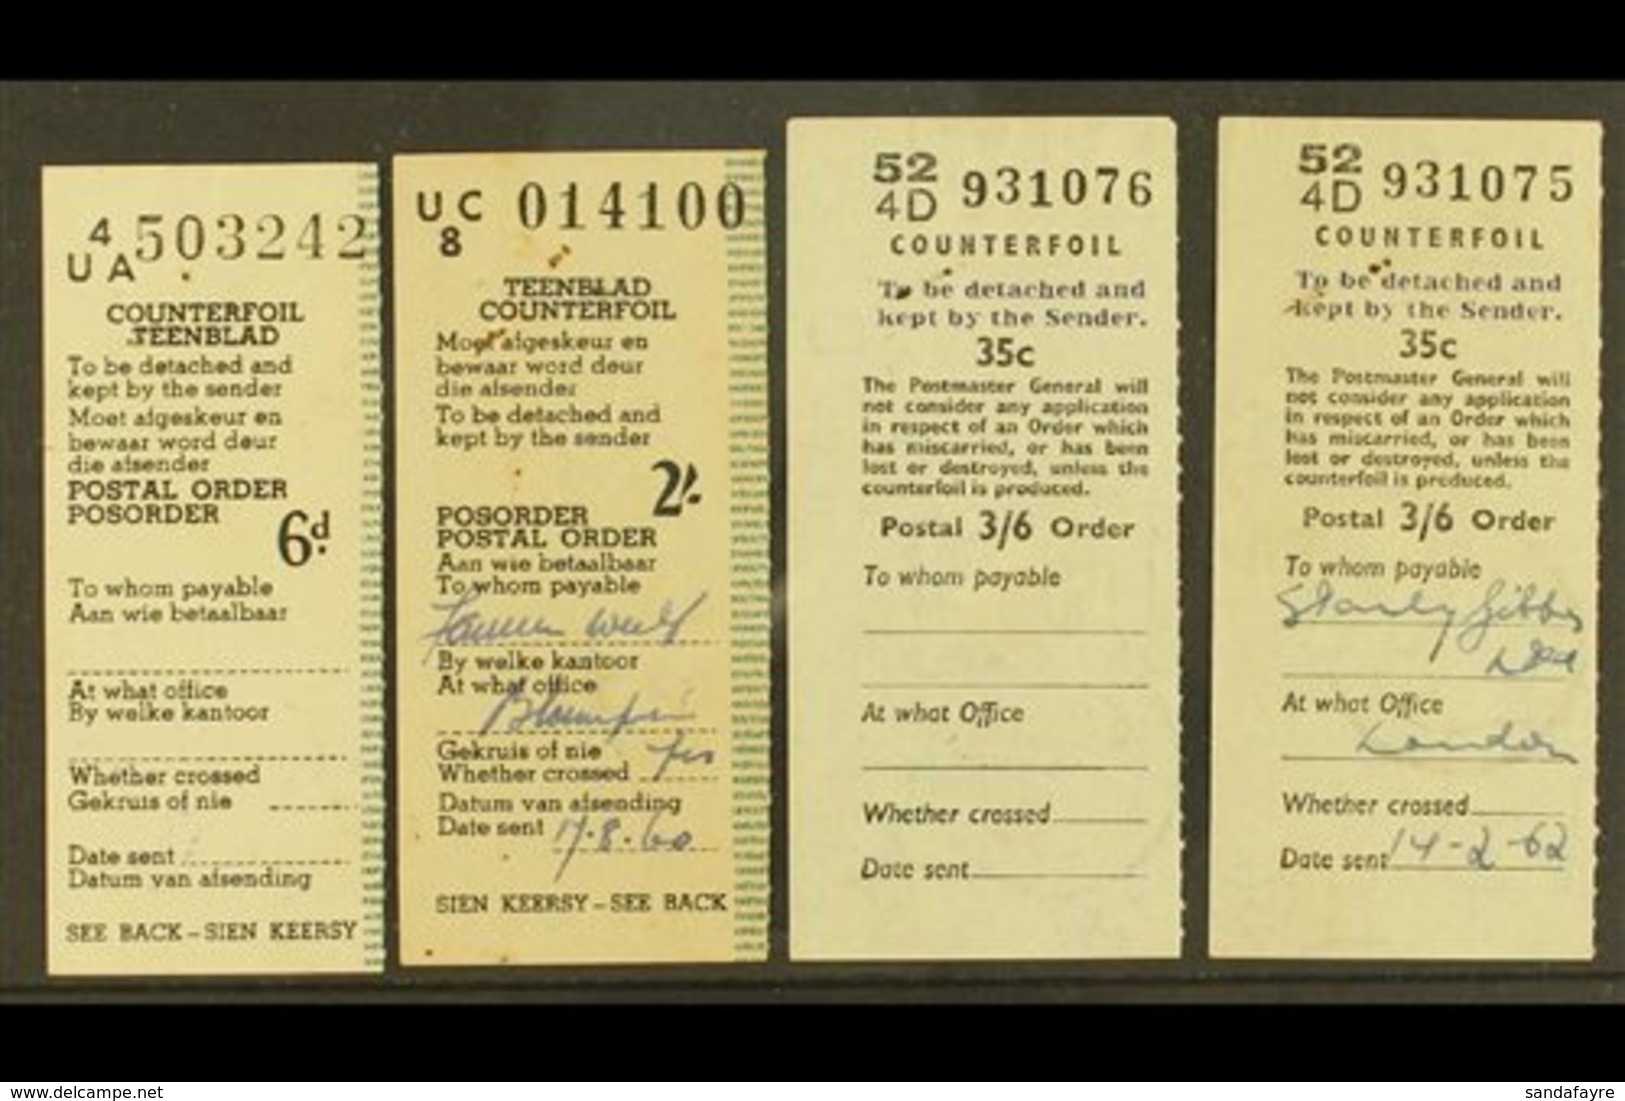 POSTAL ORDER COUNTERFOILS Group Incl. Two Union Type 6d & 2s Values With "Ramsgate" 9.8.60 C.d.s. On Reverse And GB Type - Unclassified